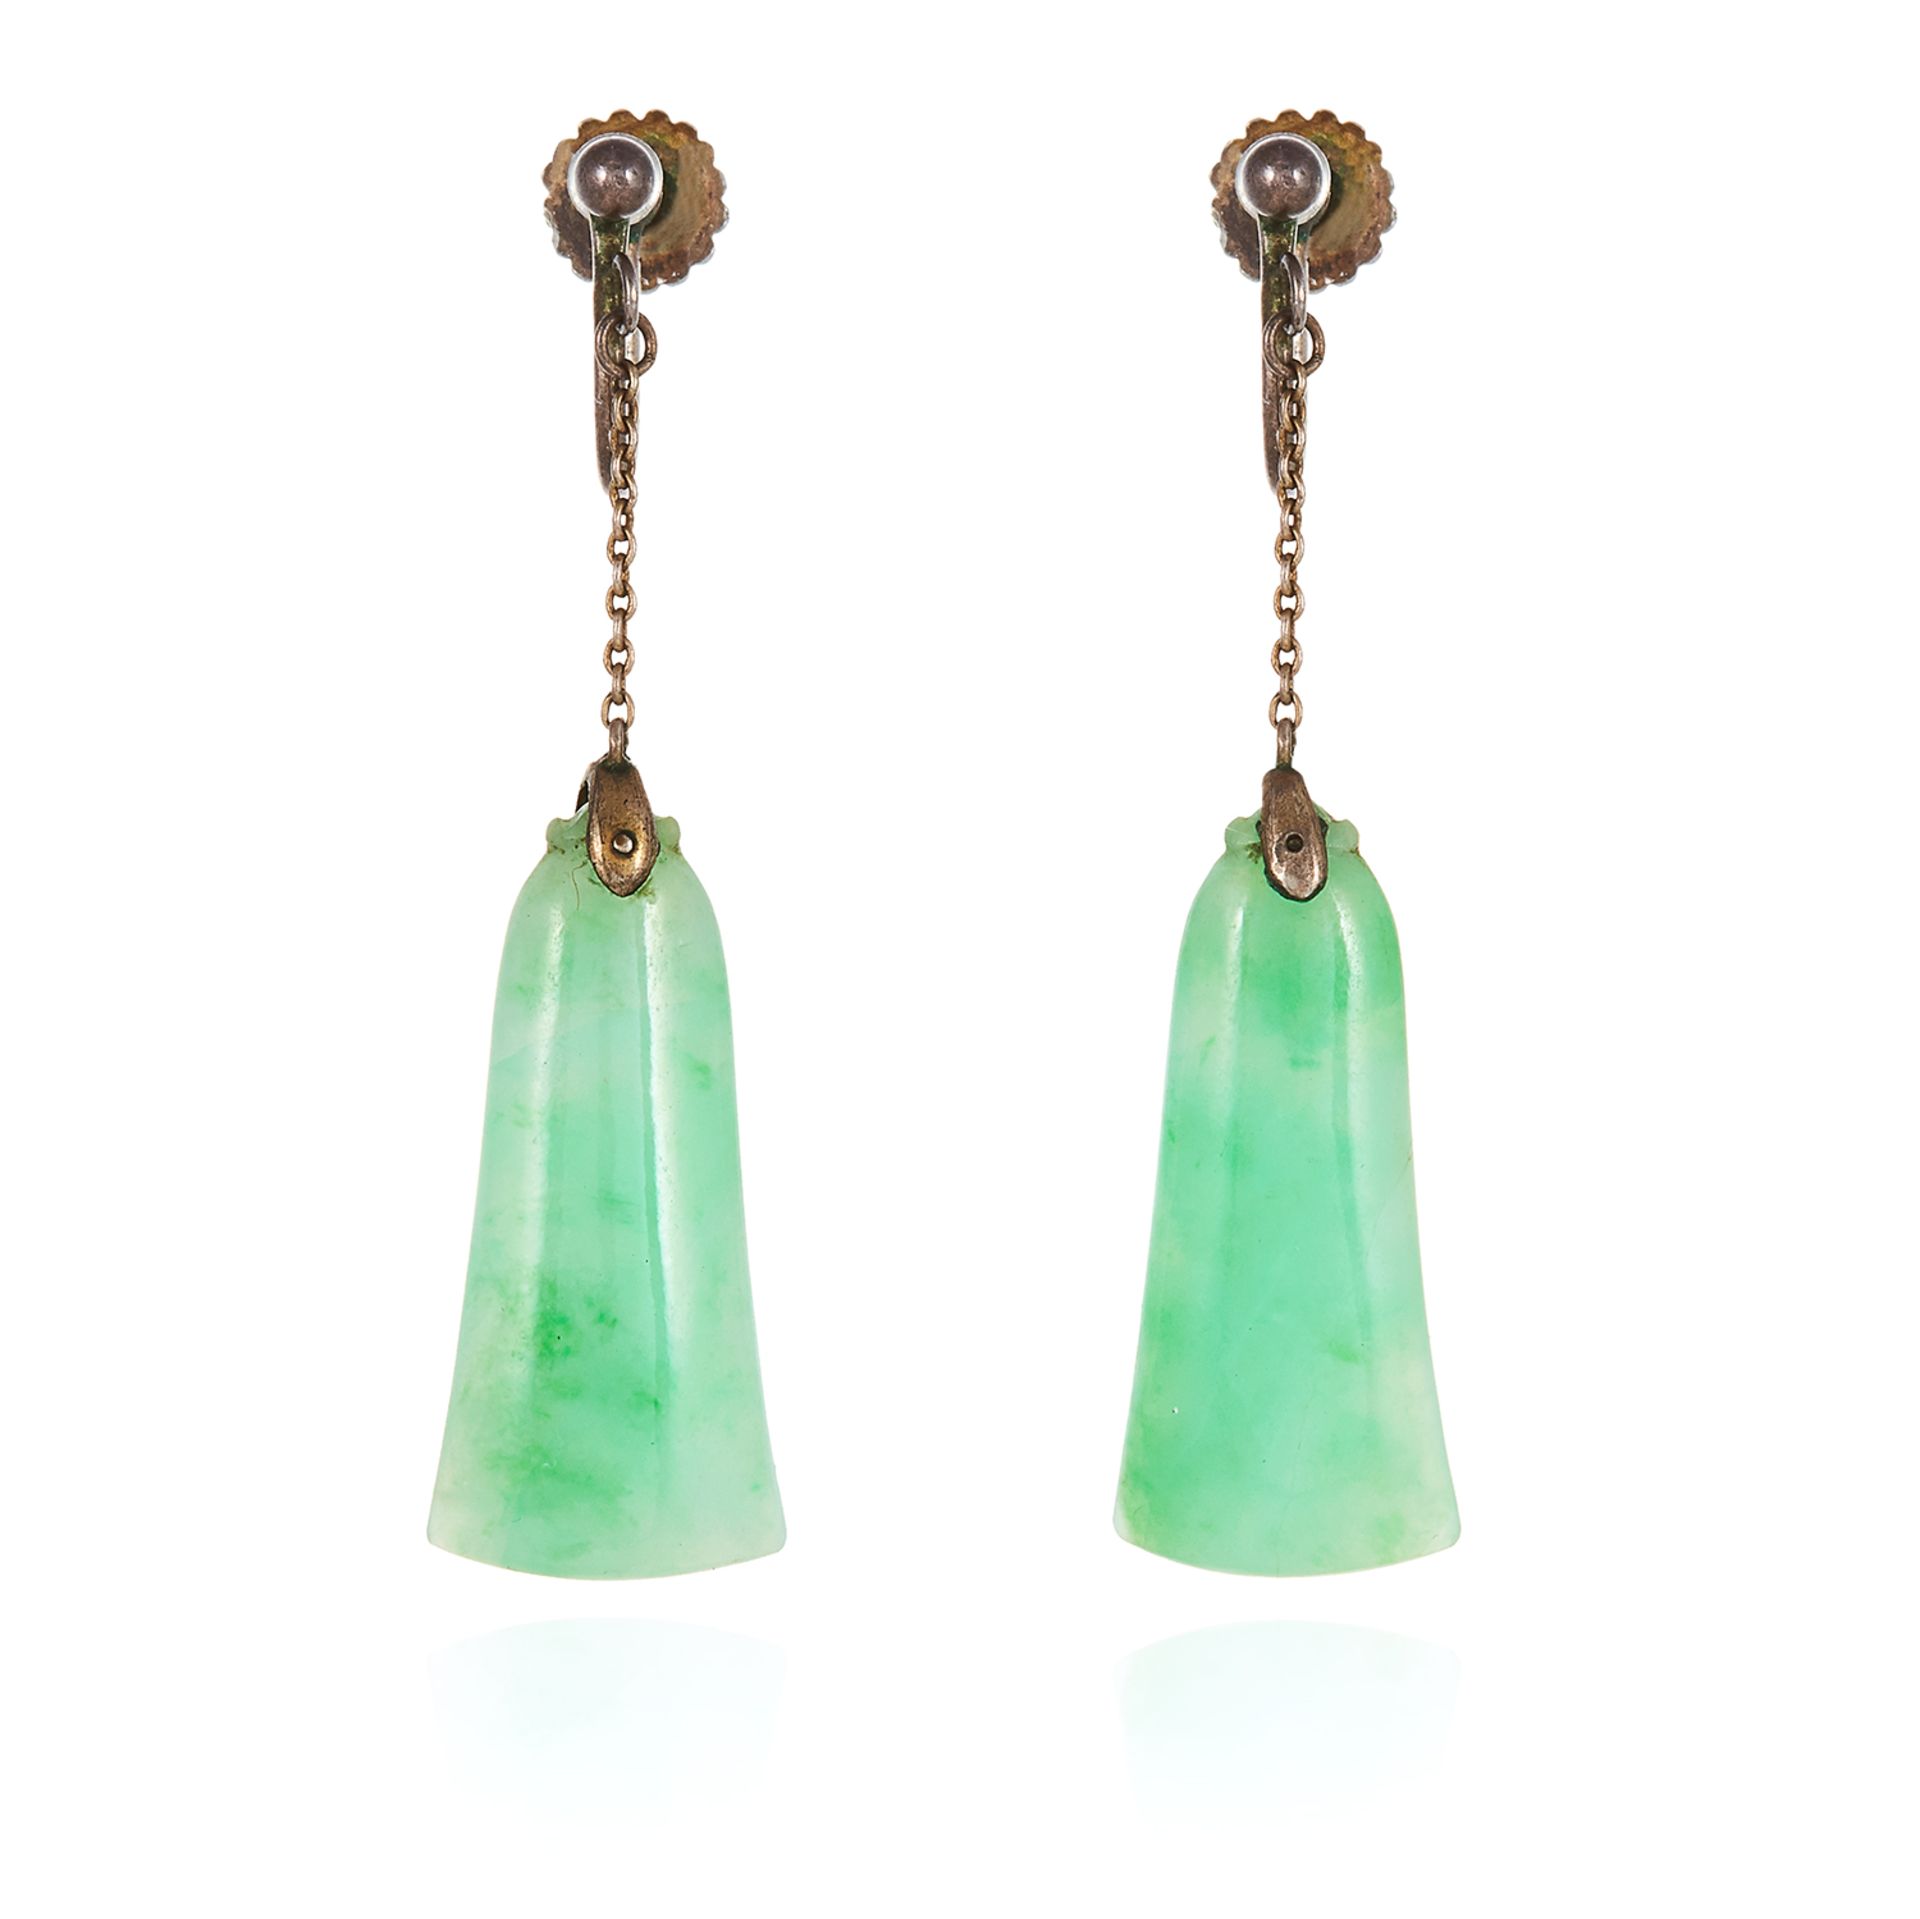 A PAIR OF JADEITE JADE DROP EARRINGS each set with a tapering polished piece of jade below a chain